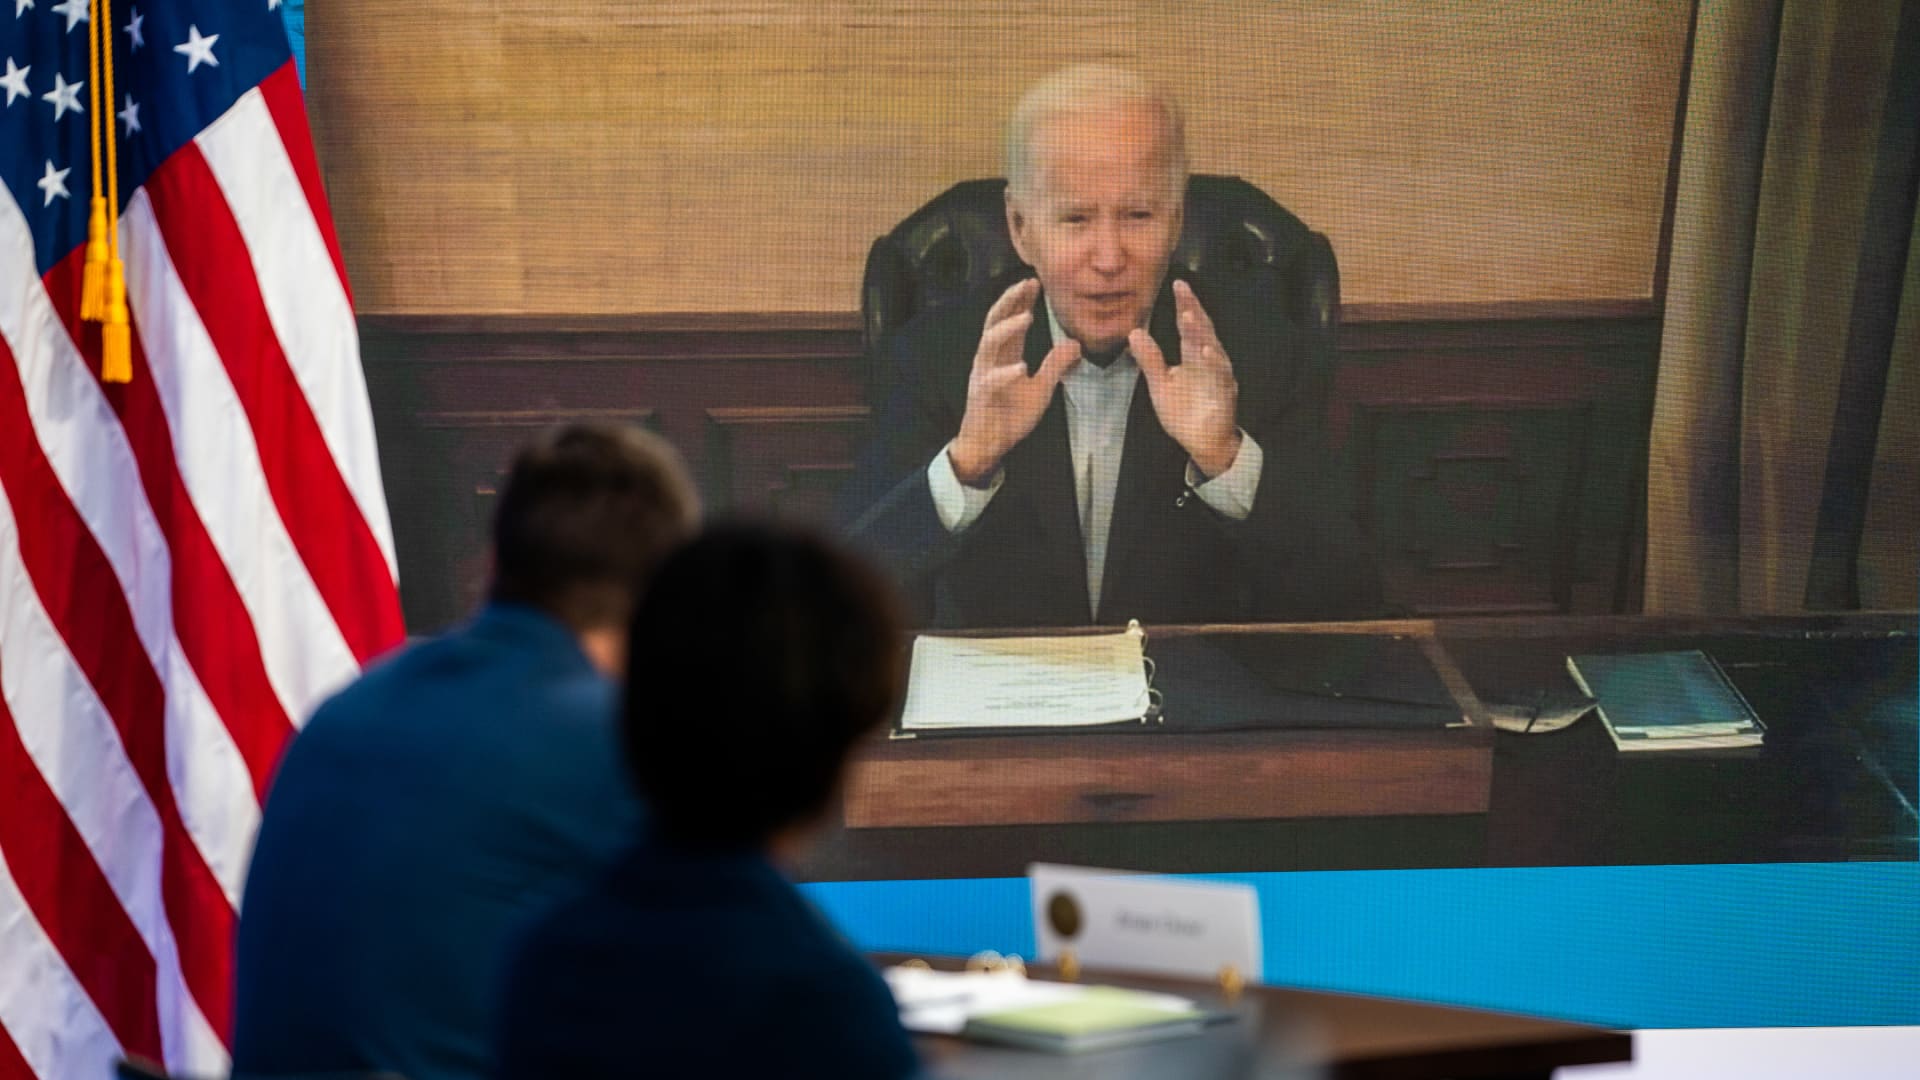 Biden’s Covid symptoms ‘almost completely resolved,’ doctor says